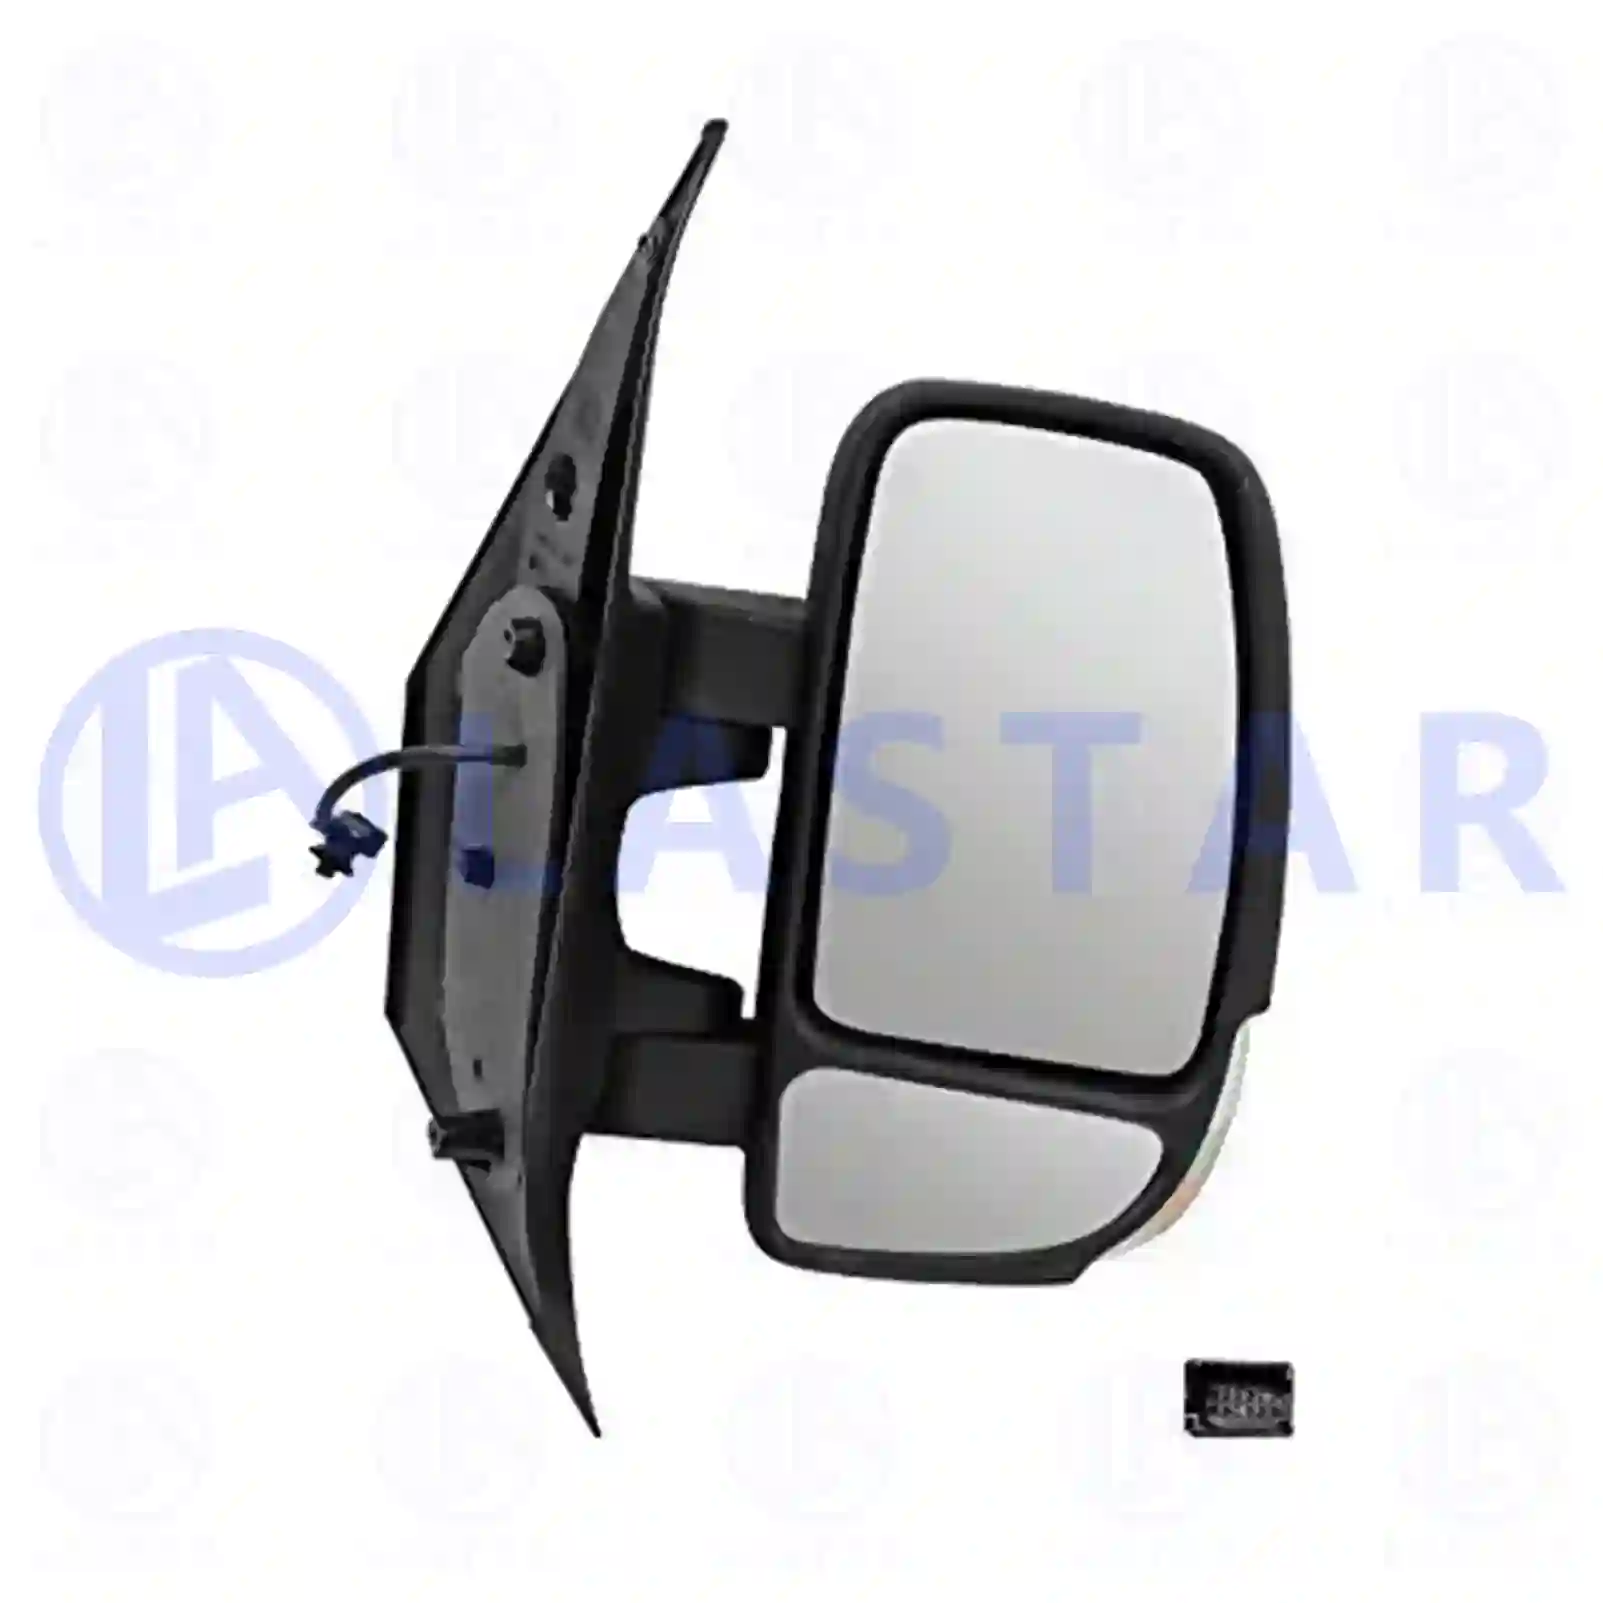 Main mirror, complete, right, 77720449, 963010146R ||  77720449 Lastar Spare Part | Truck Spare Parts, Auotomotive Spare Parts Main mirror, complete, right, 77720449, 963010146R ||  77720449 Lastar Spare Part | Truck Spare Parts, Auotomotive Spare Parts